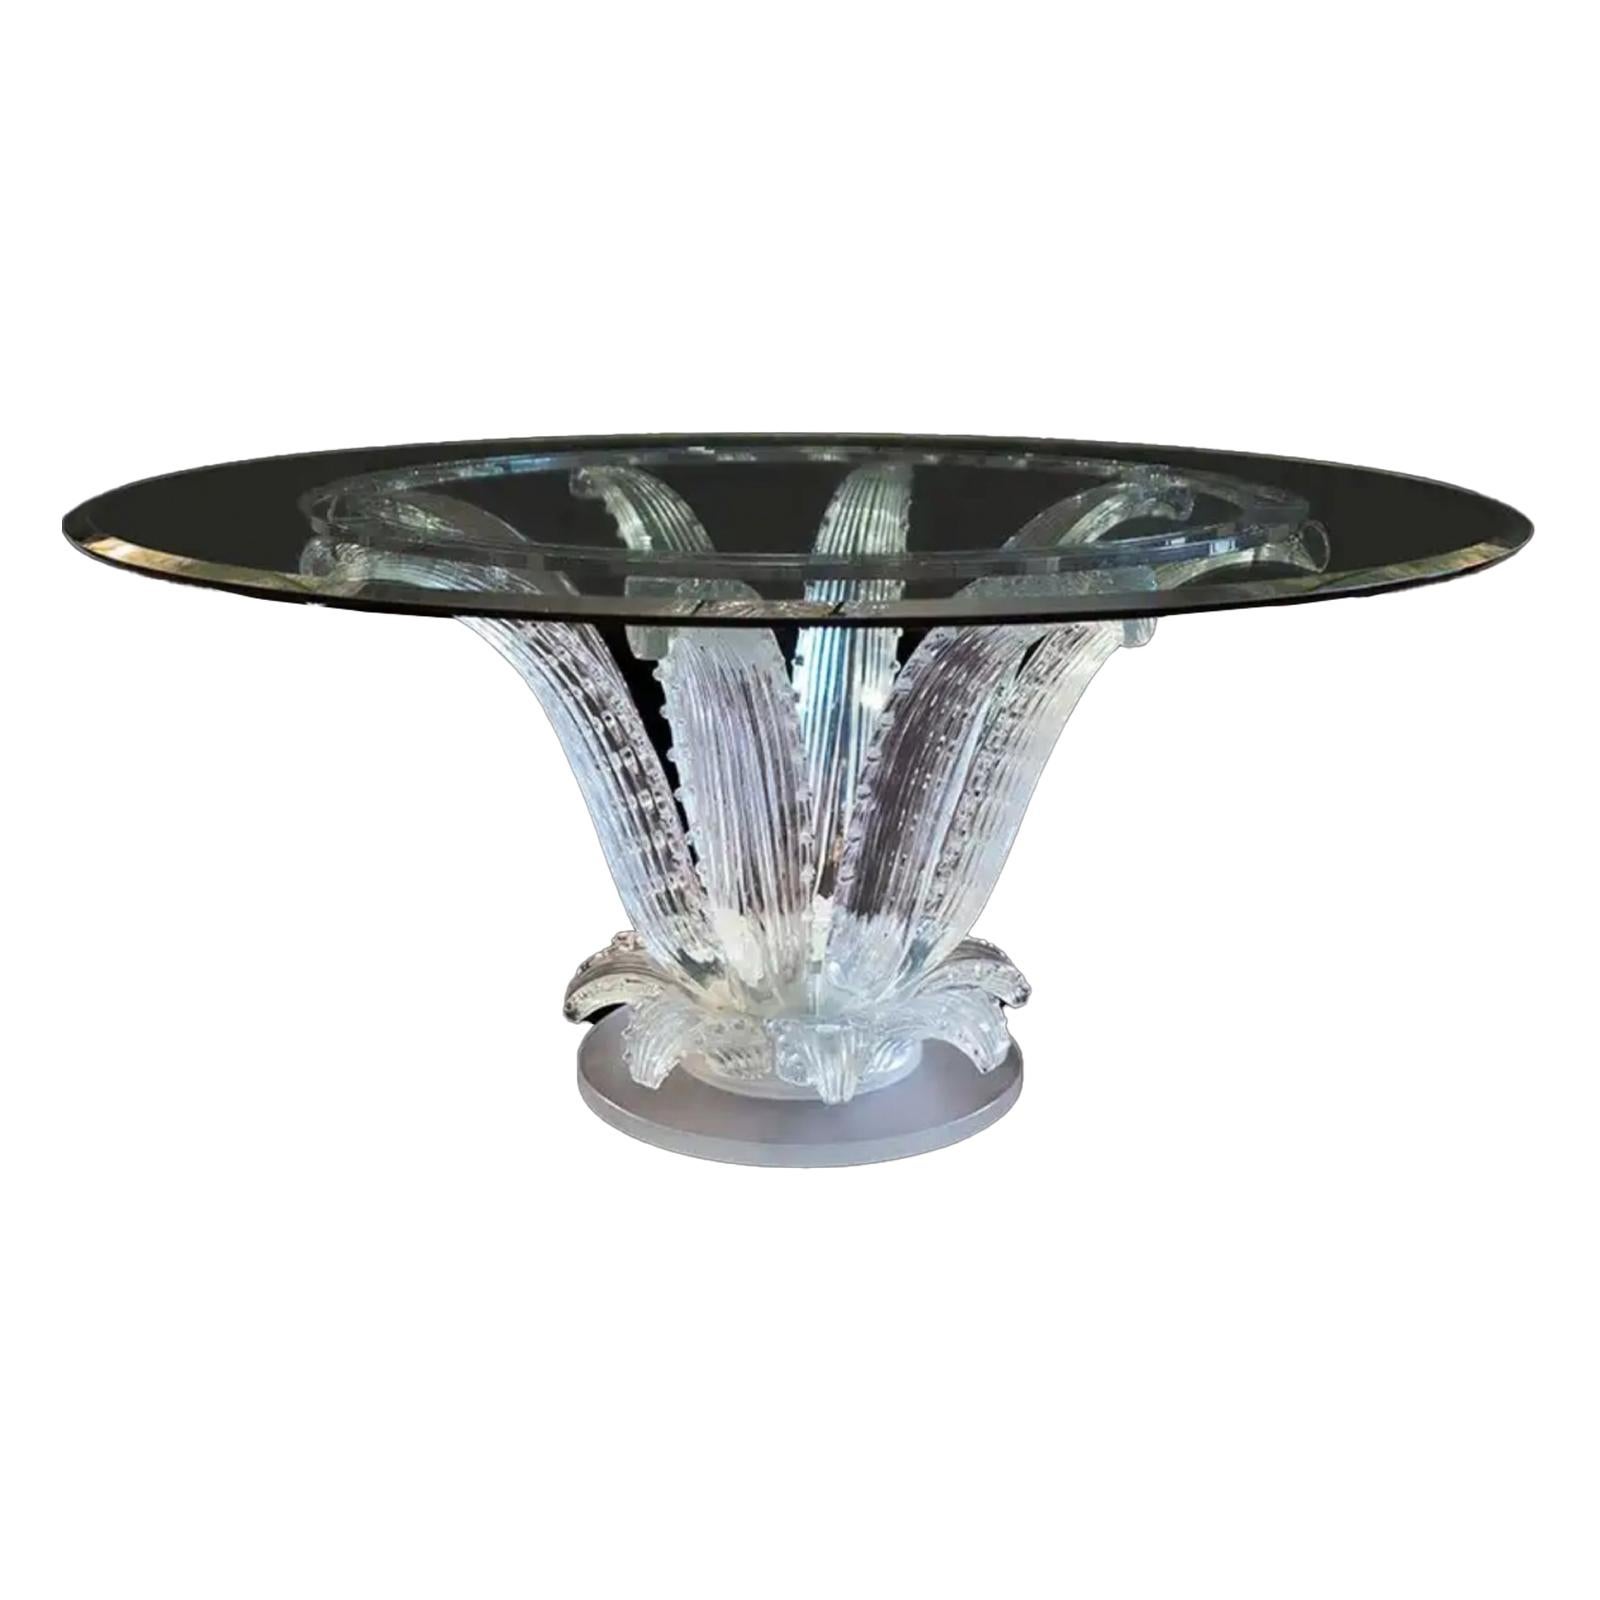 Created in 1951 by Marc Lalique, the Cactus table fits into the most creative spaces of contemporary decoration. The swirls of crystal punctuated by light are a vertigo of a thousand lights, effortlessly absorbing the gaze.

This sumptuous table